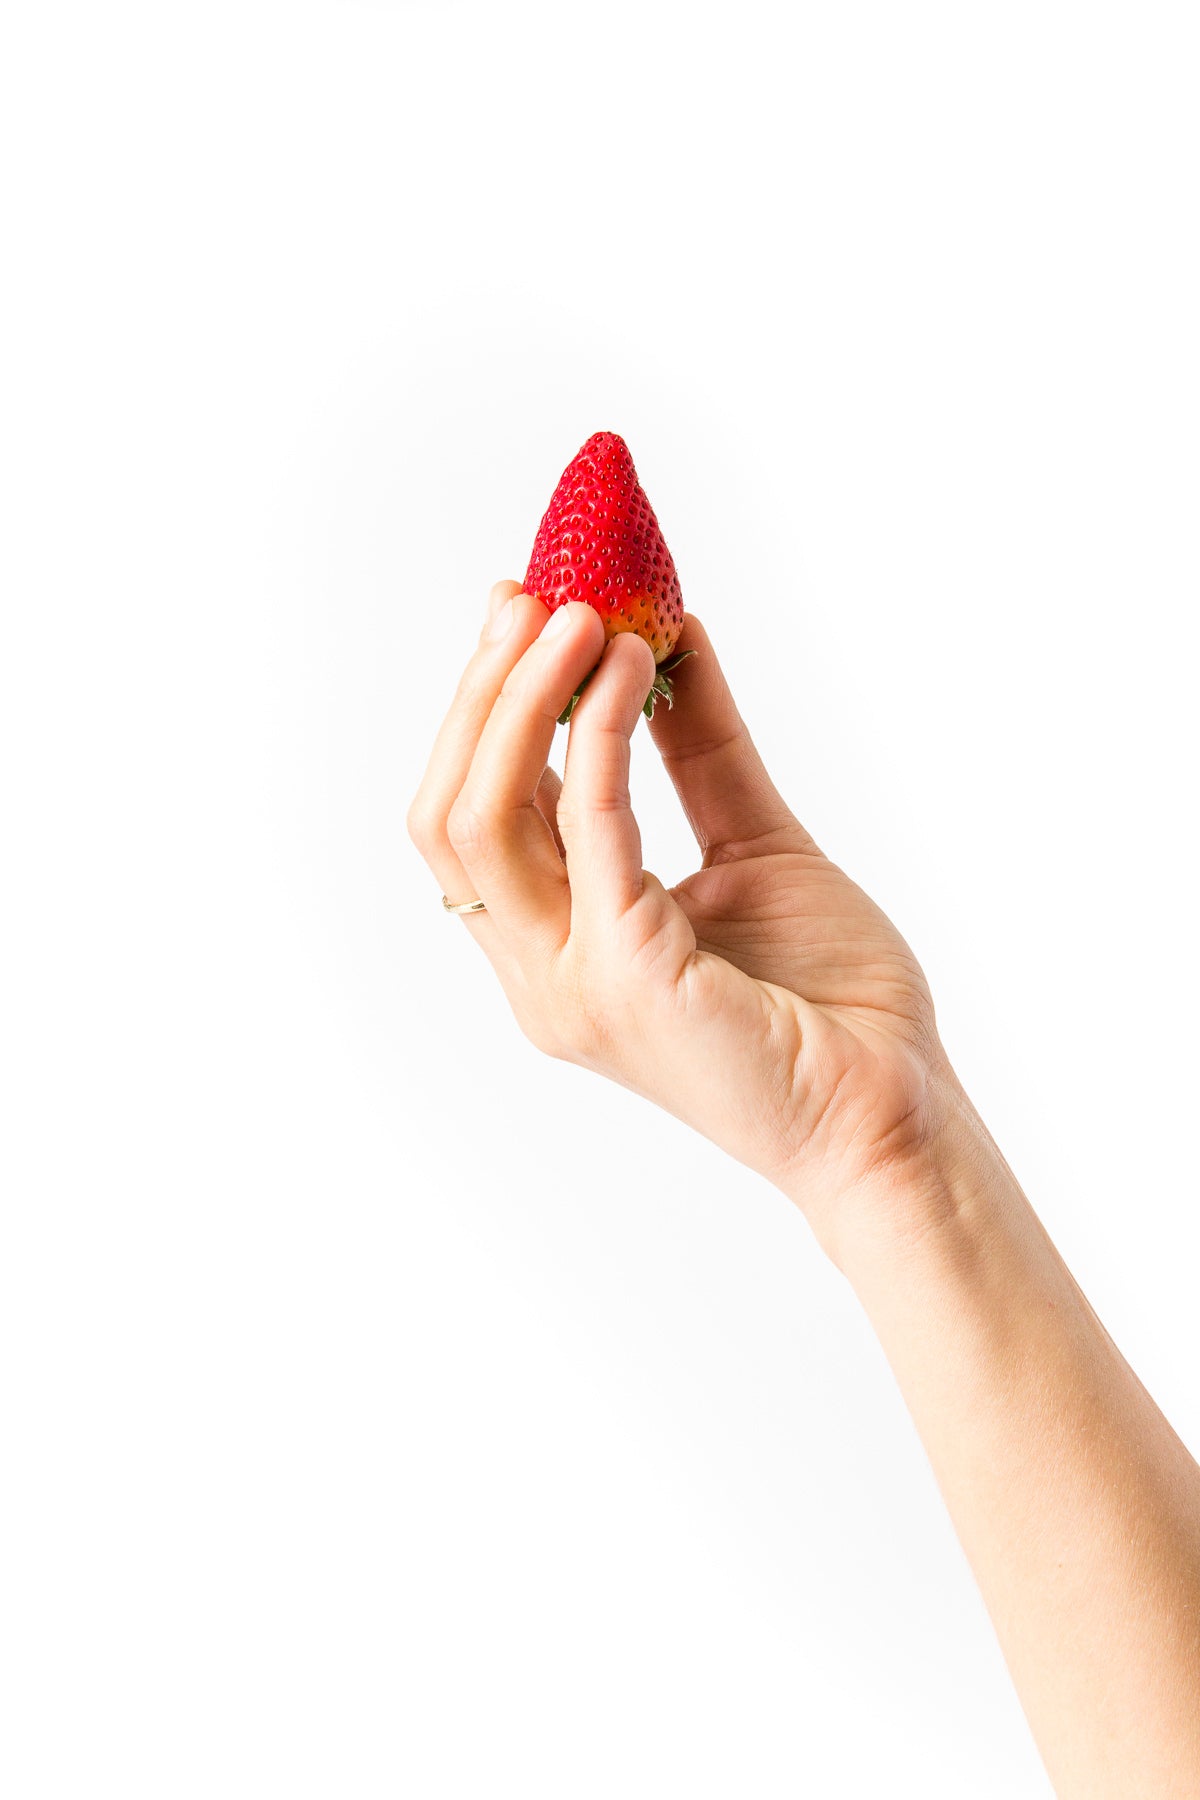 Image of a hand holding a strawberry for Miss Jones Baking Co Strawberry Buttermilk Donuts recipe